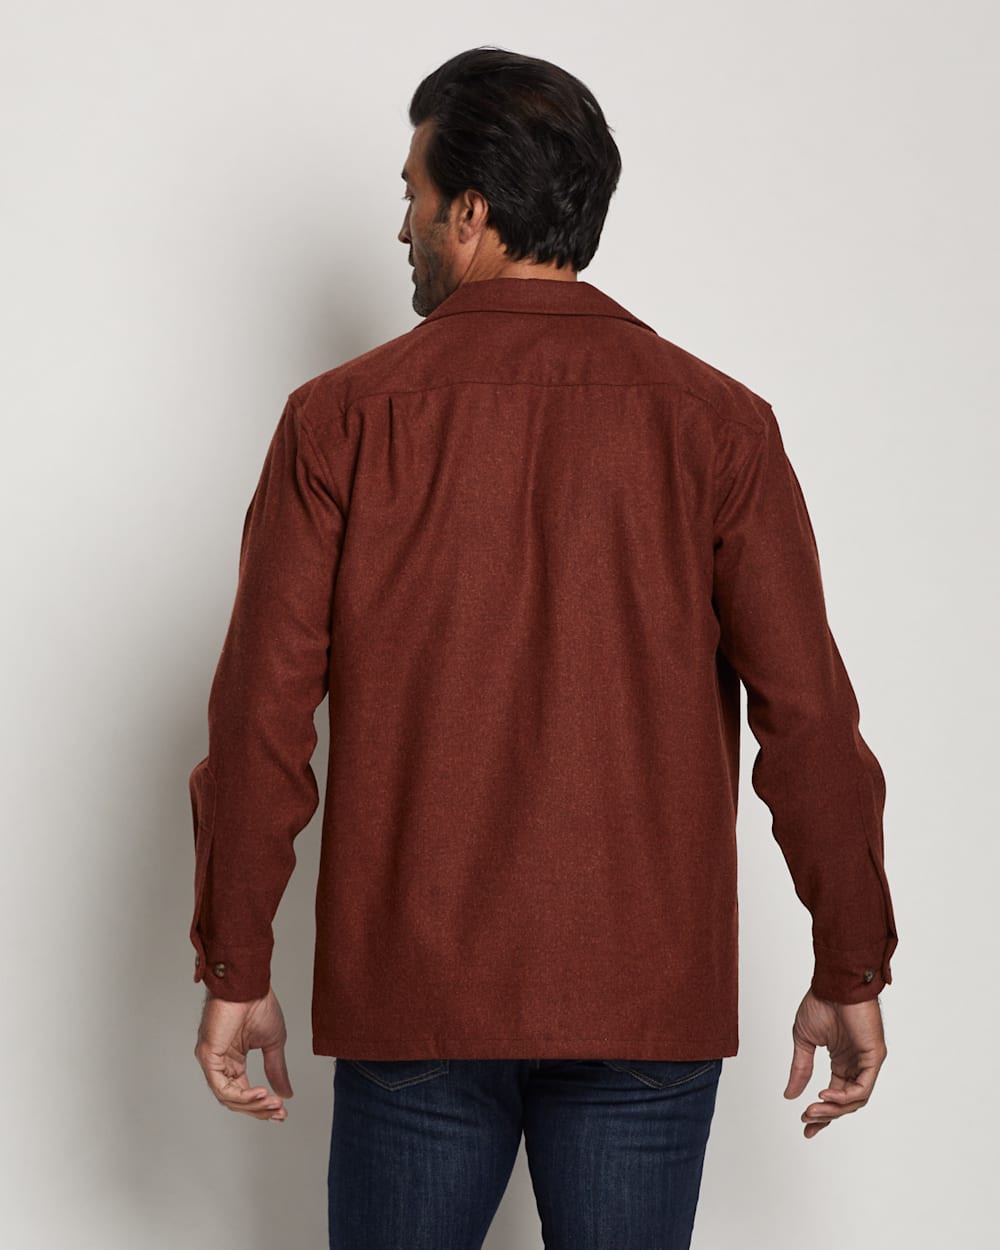 ALTERNATE VIEW OF MEN'S BOARD SHIRT IN RED MIX image number 5